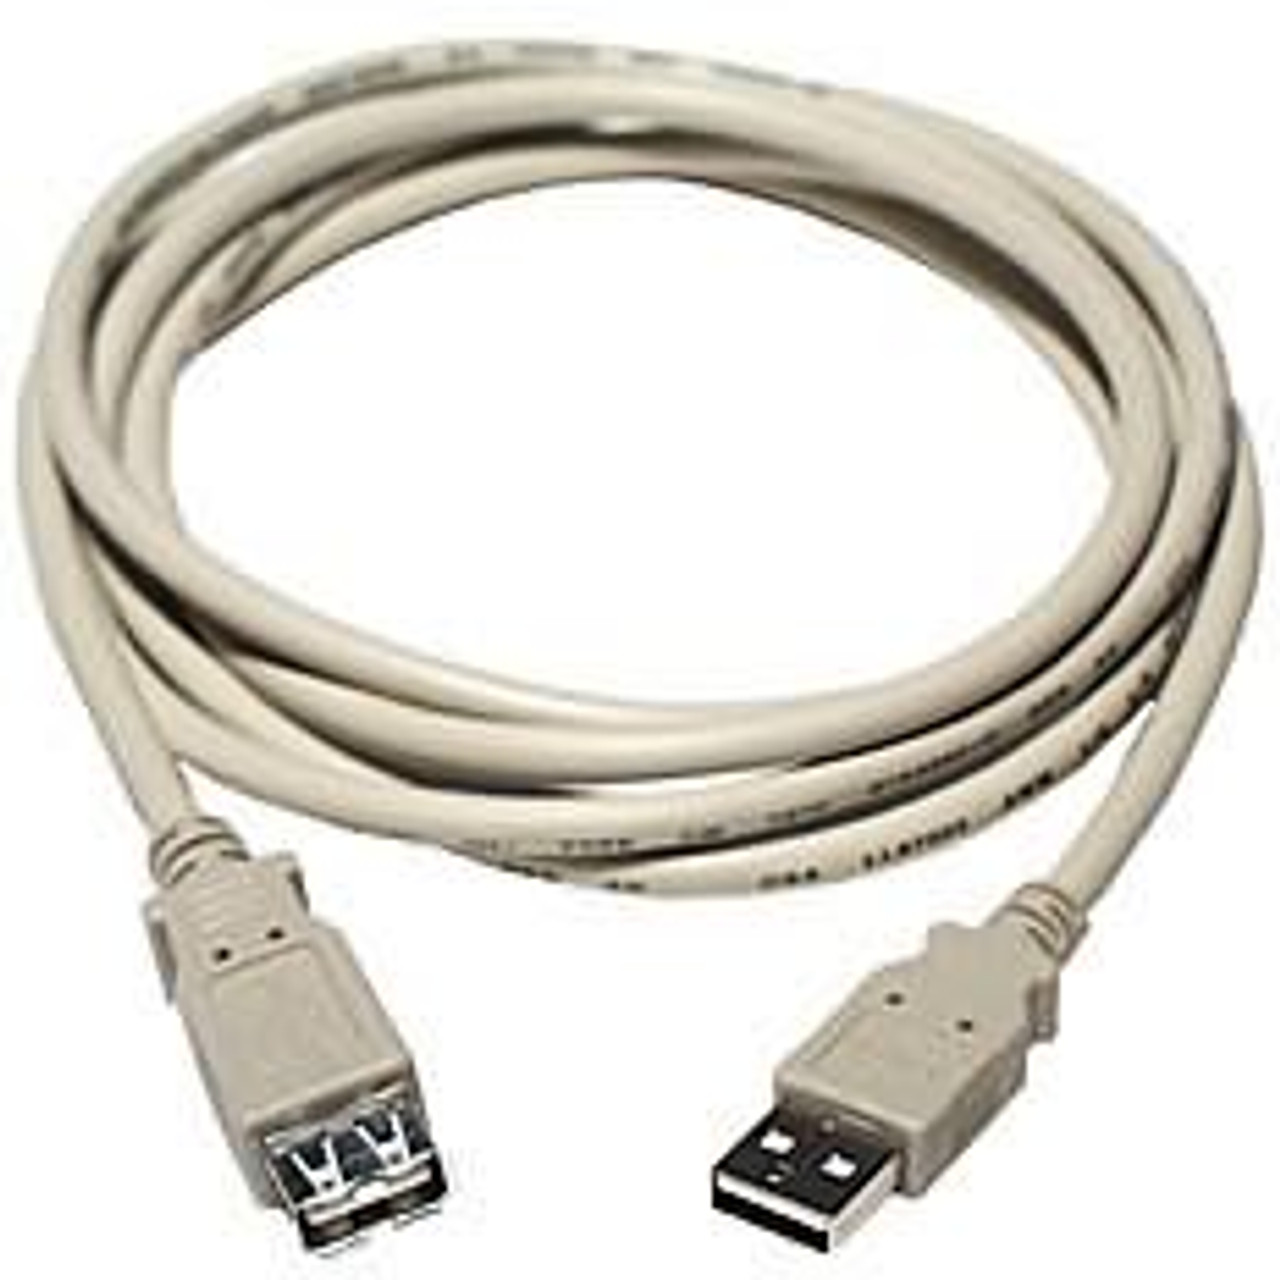 USB Cable 3' AA Male-to Female Extension, Ivory